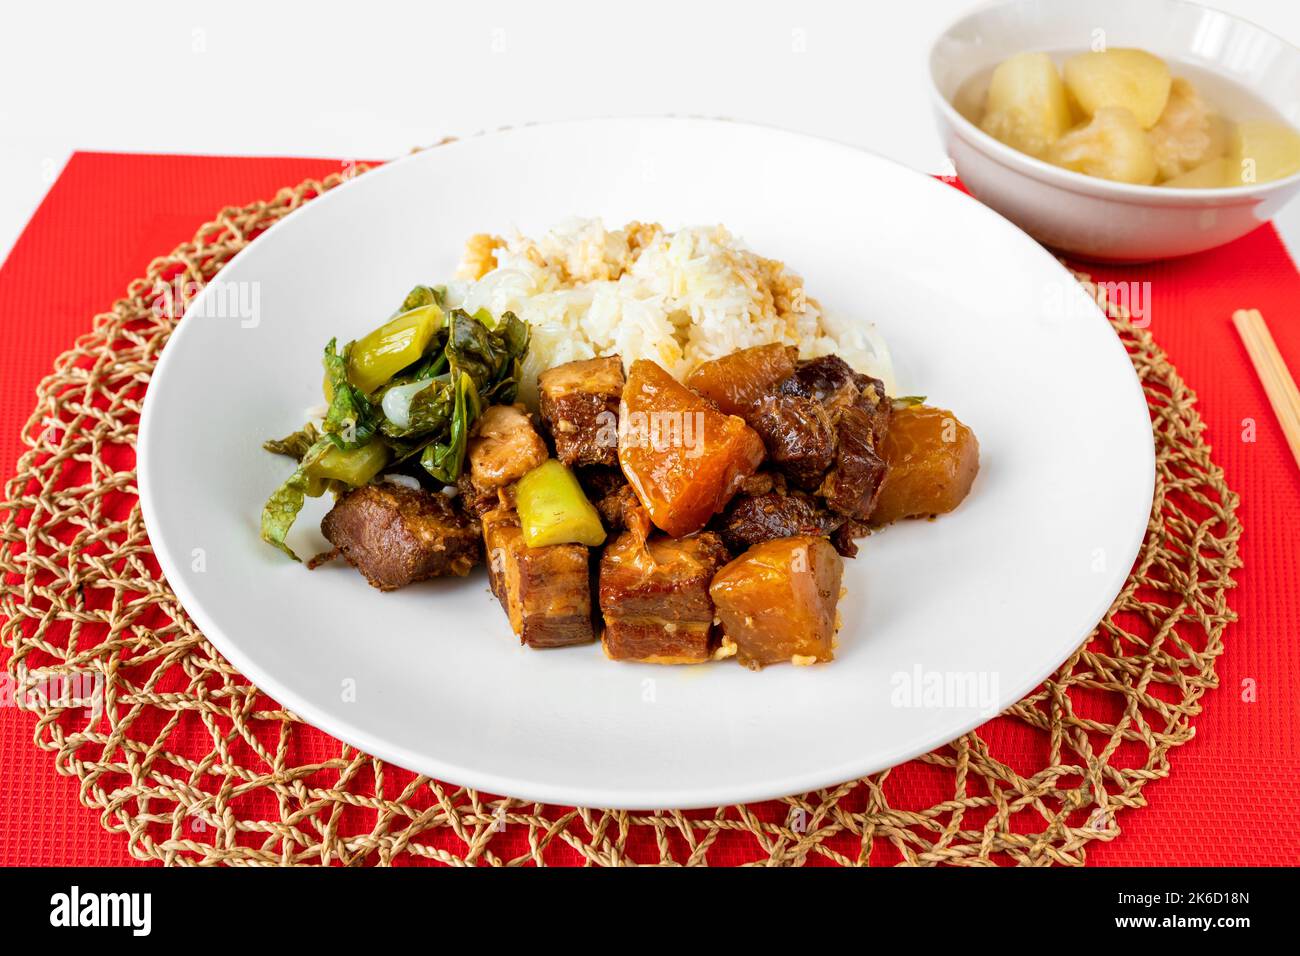 Caramelized cube of roasted pork belly, stewed cabbage and kohlrabi, rice on plate, chopstick on red table-cloth and circle bamboo pad, compote. Stock Photo